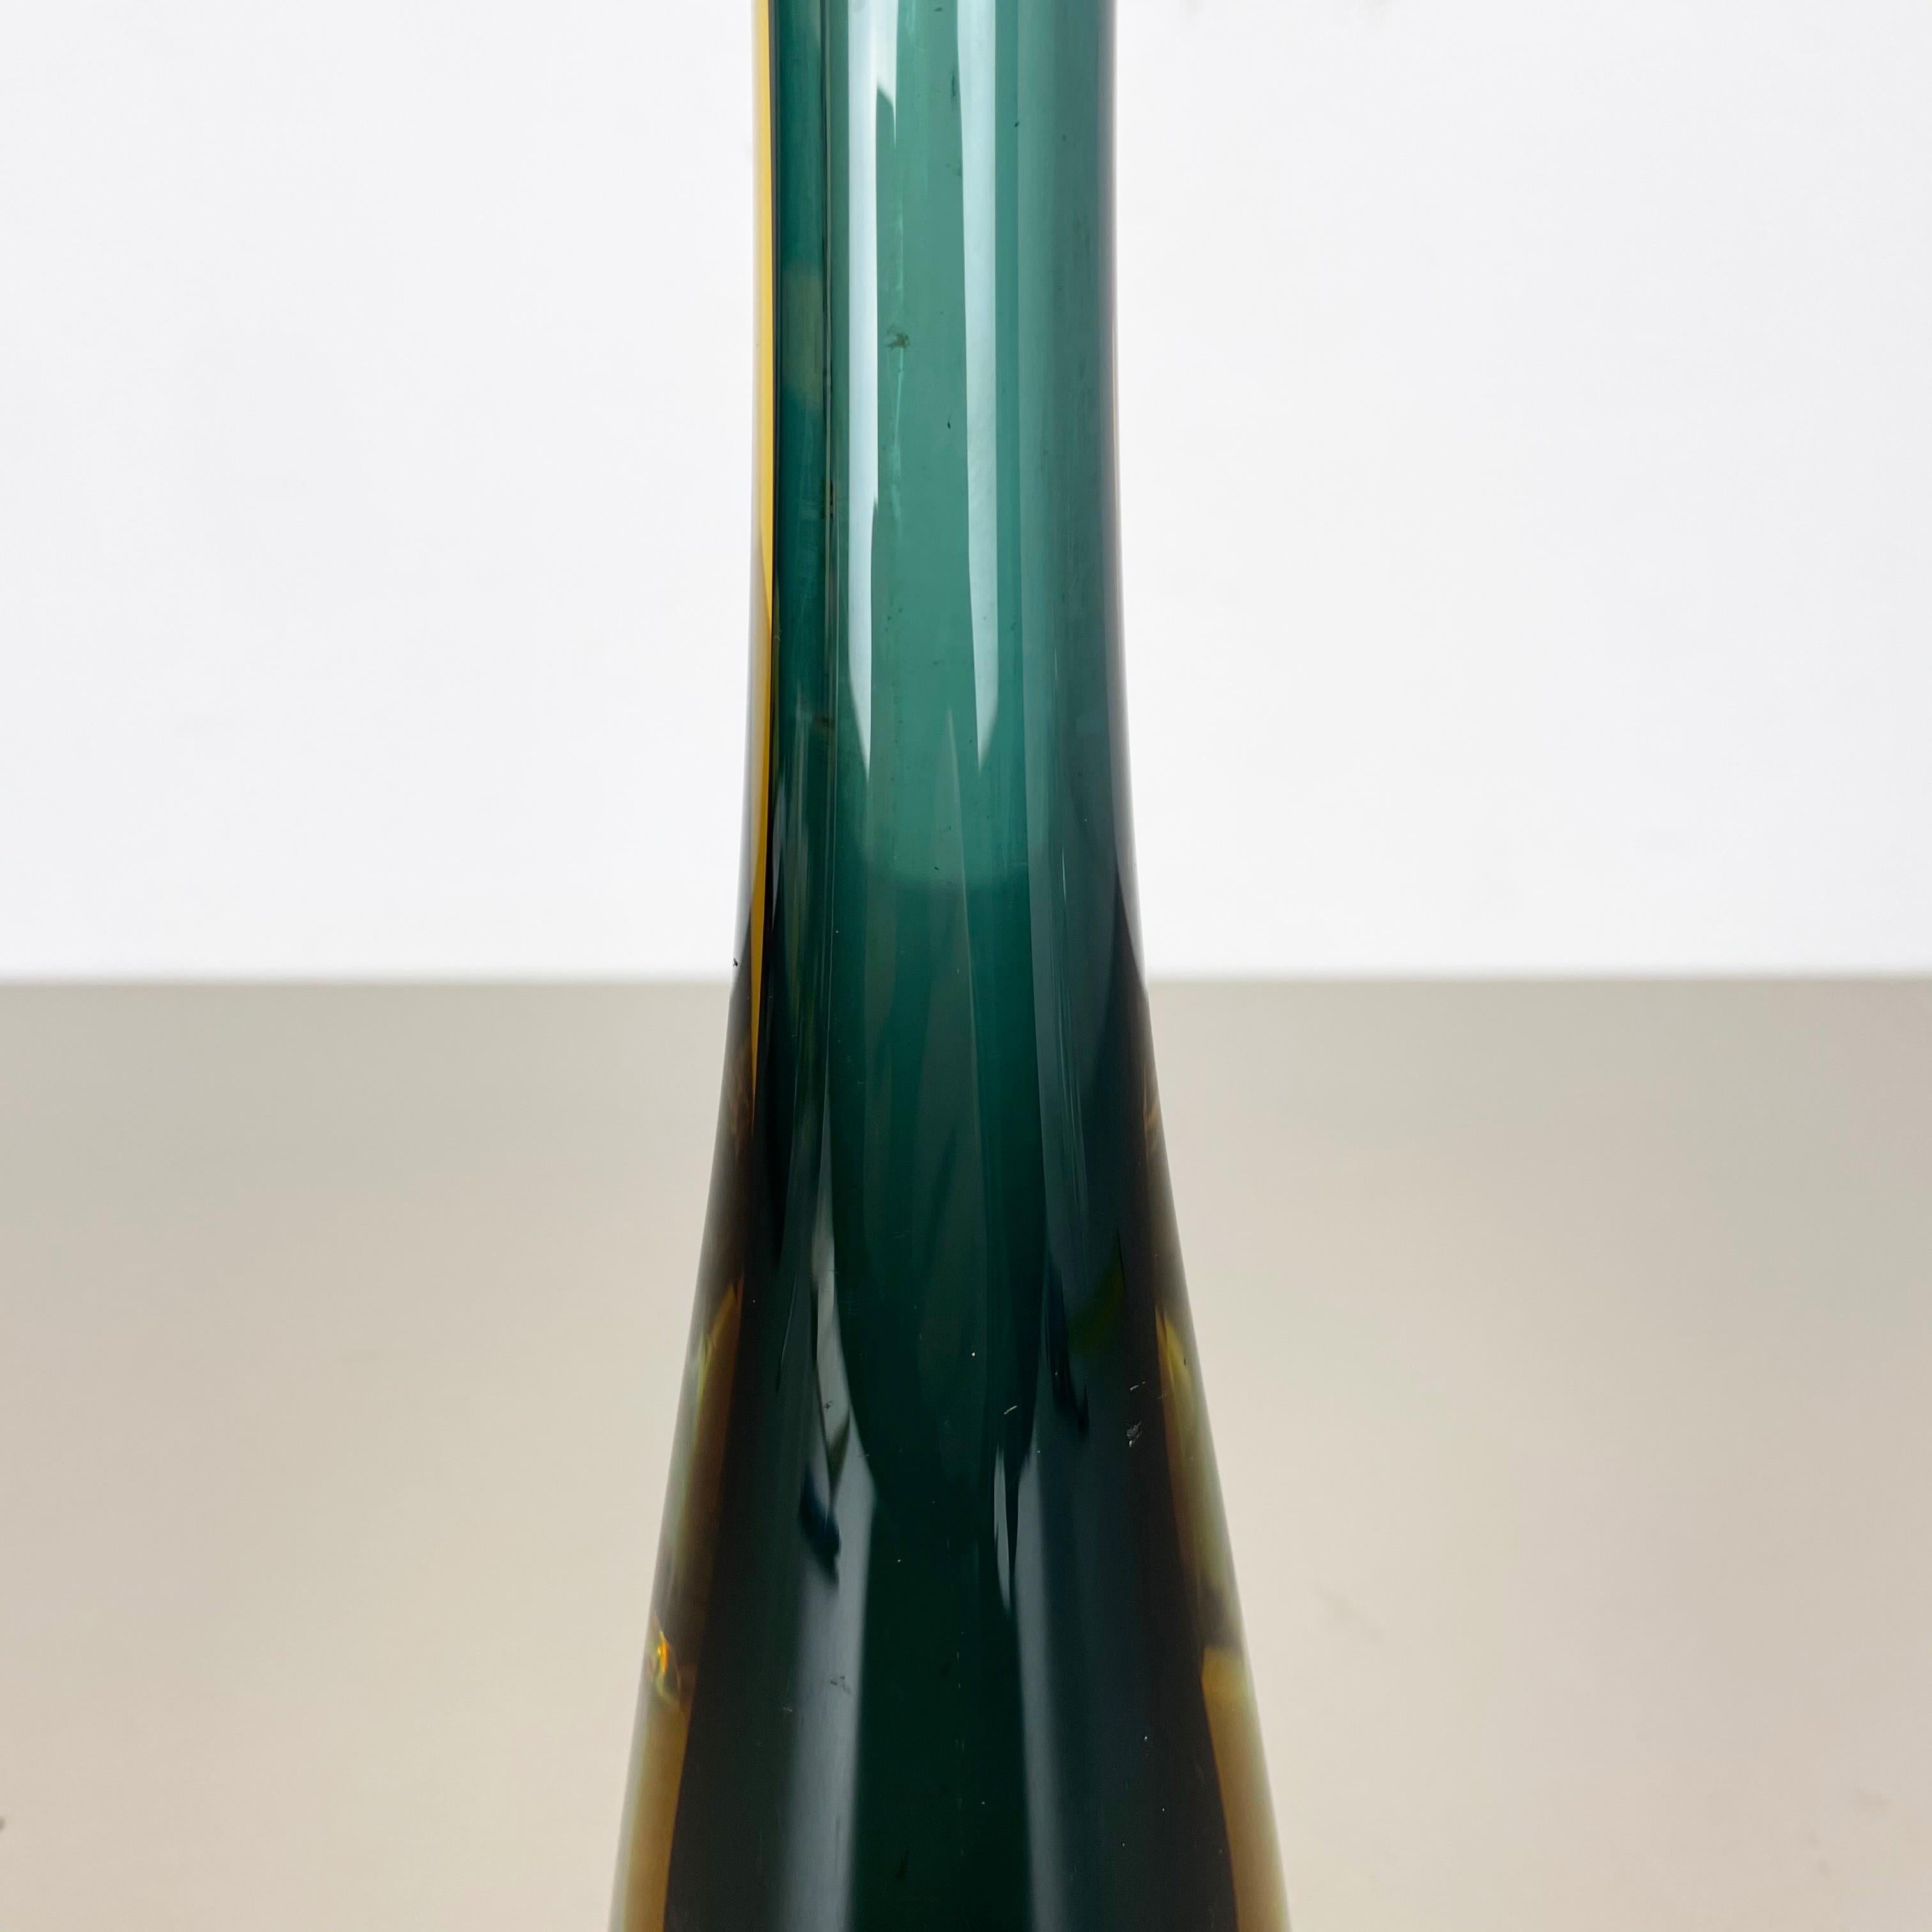 20th Century Large Murano Glass Sommerso Vase Designed by Flavio Poli Attributed Italy 1970s For Sale